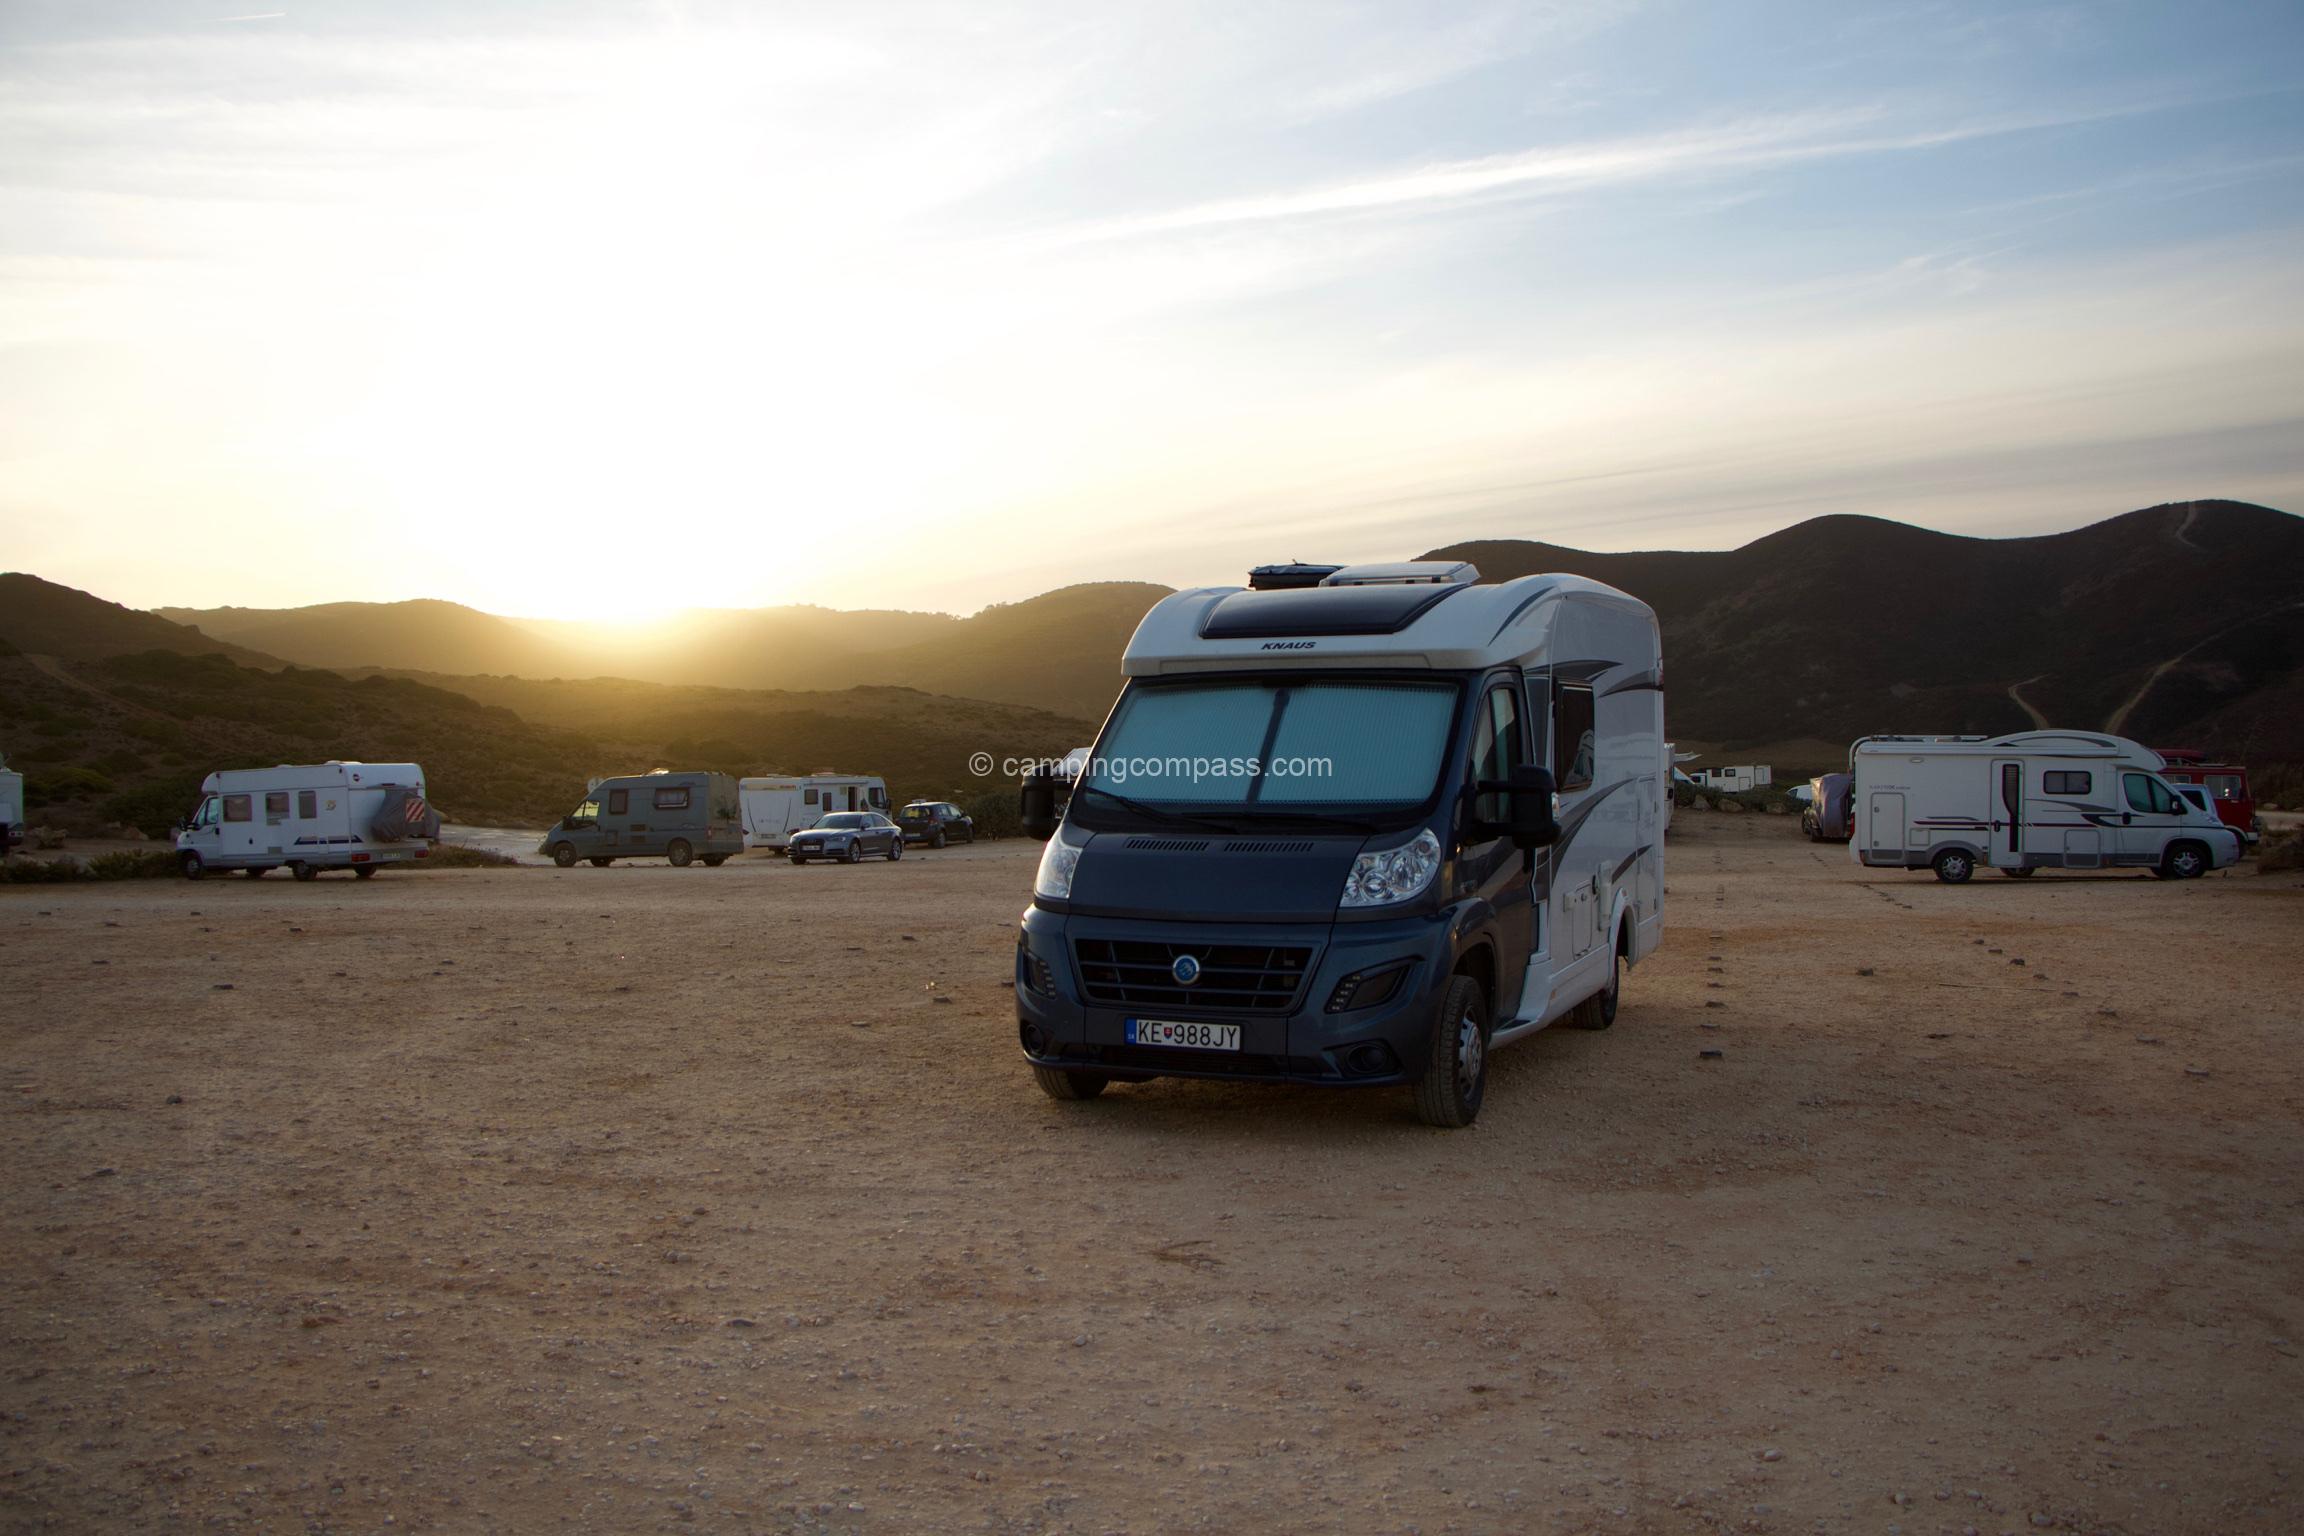 Apps for caravanning